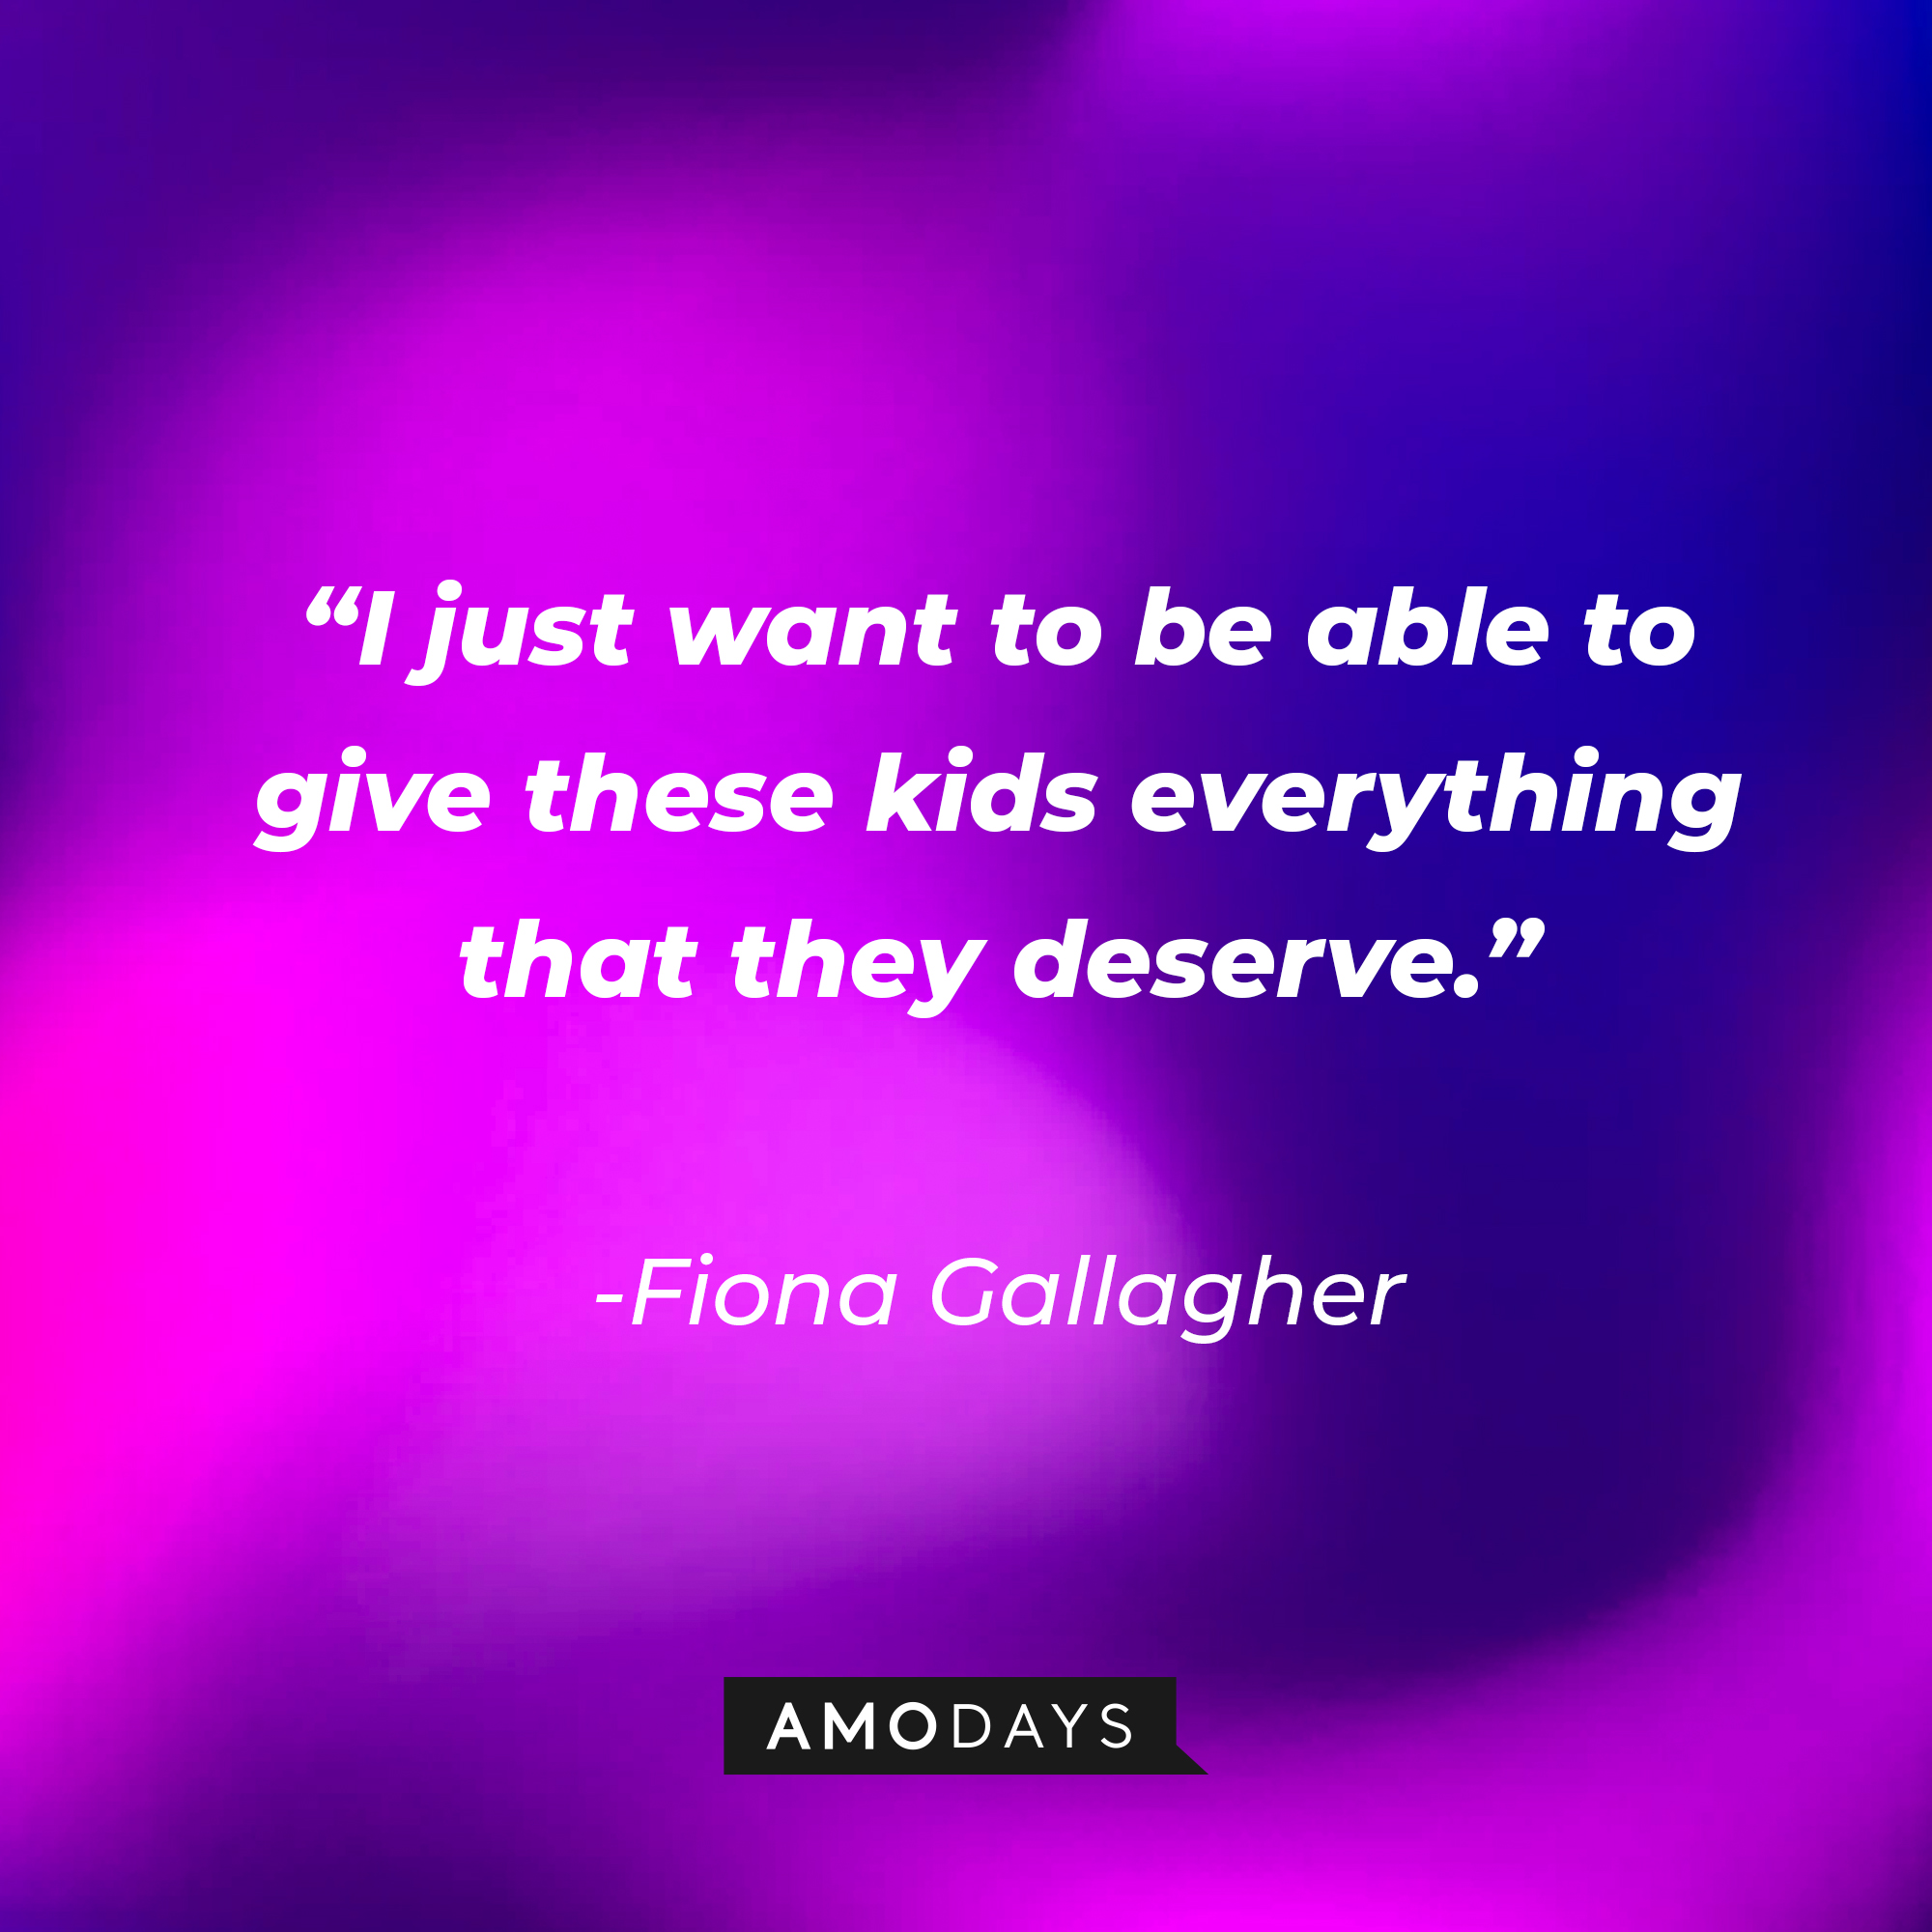 Fiona Gallagher’s quote:  "I just want to be able to give these kids everything that they deserve." | Source: AmoDays